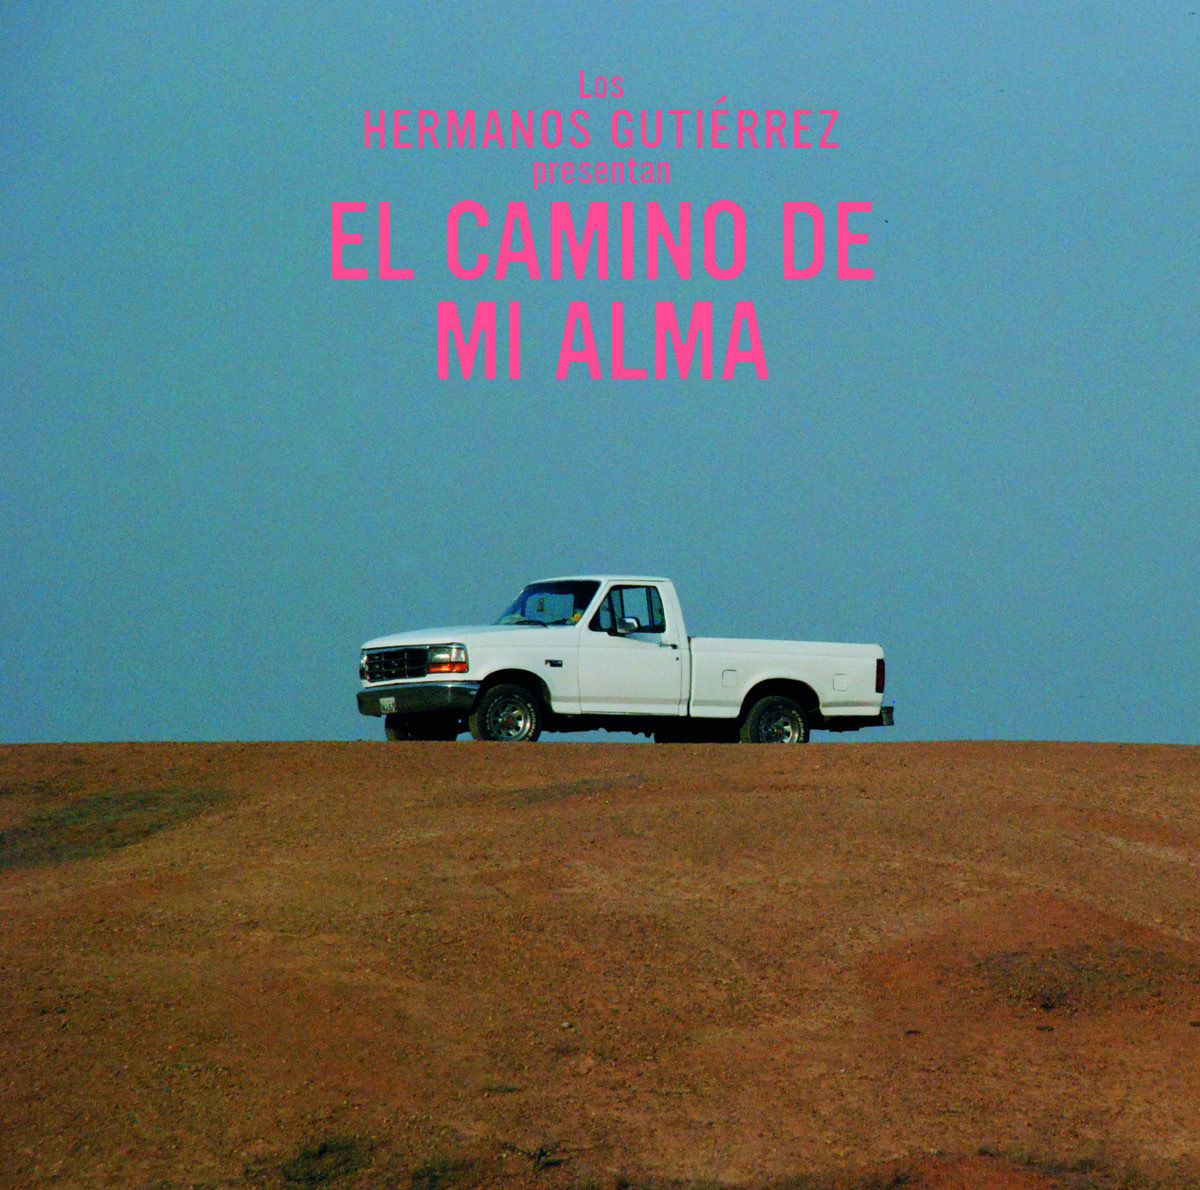 The cover of El Camino De Mi Alma by Hermanos Gutierrez, showing a white pickup truck against a blue sky, with pink text above.